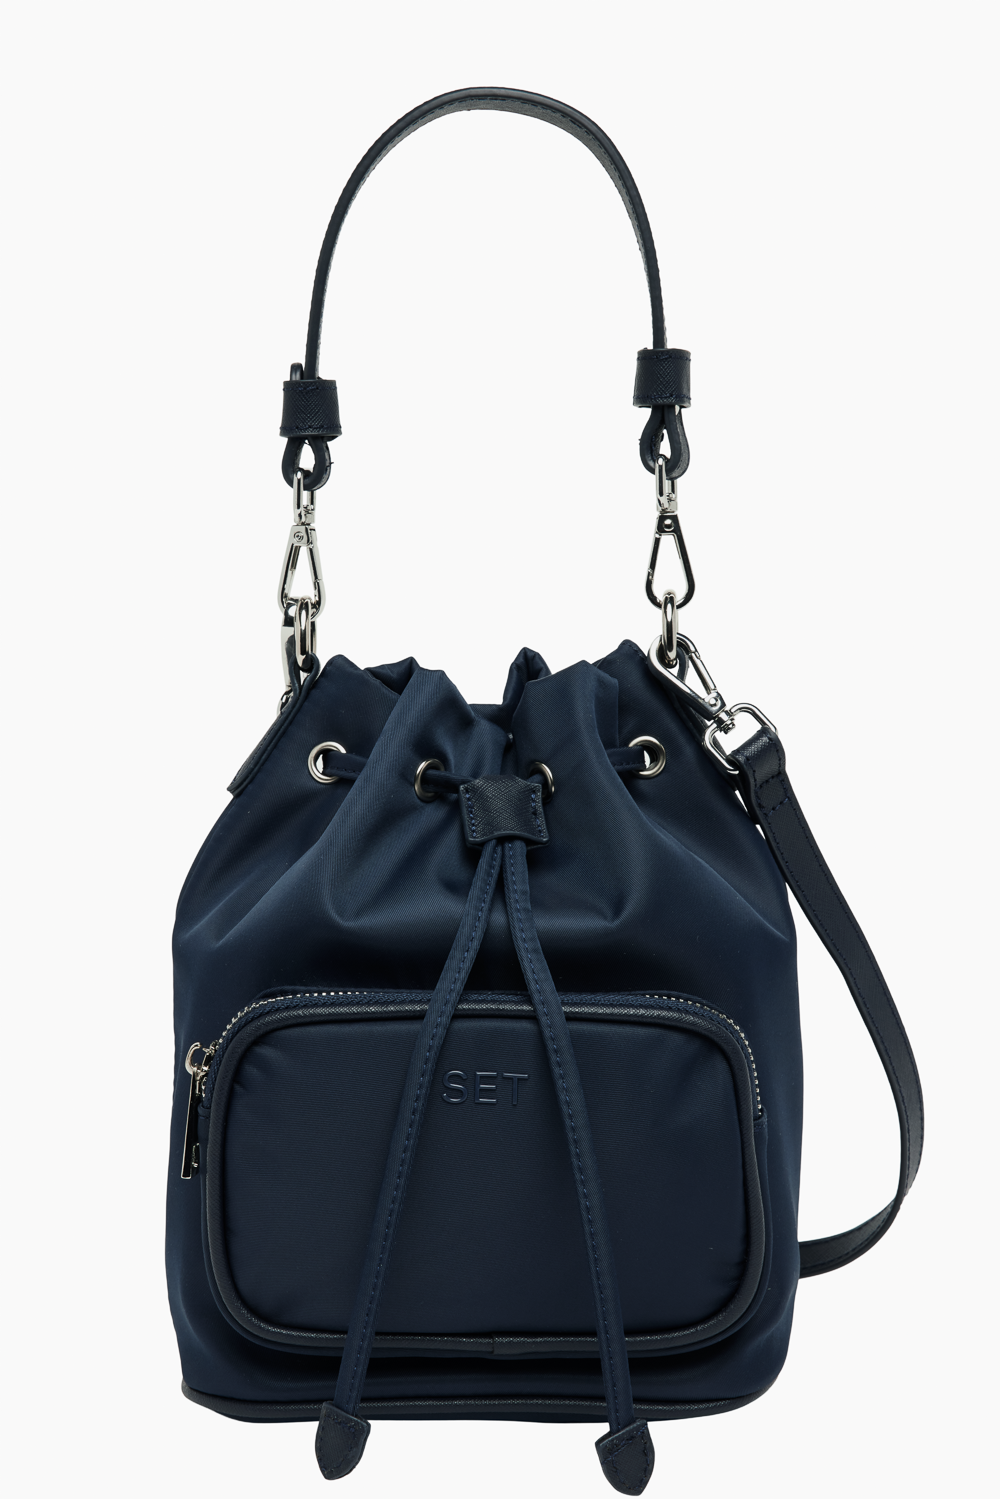 EVERYDAY BUCKET BAG - OXFORD Featured Image